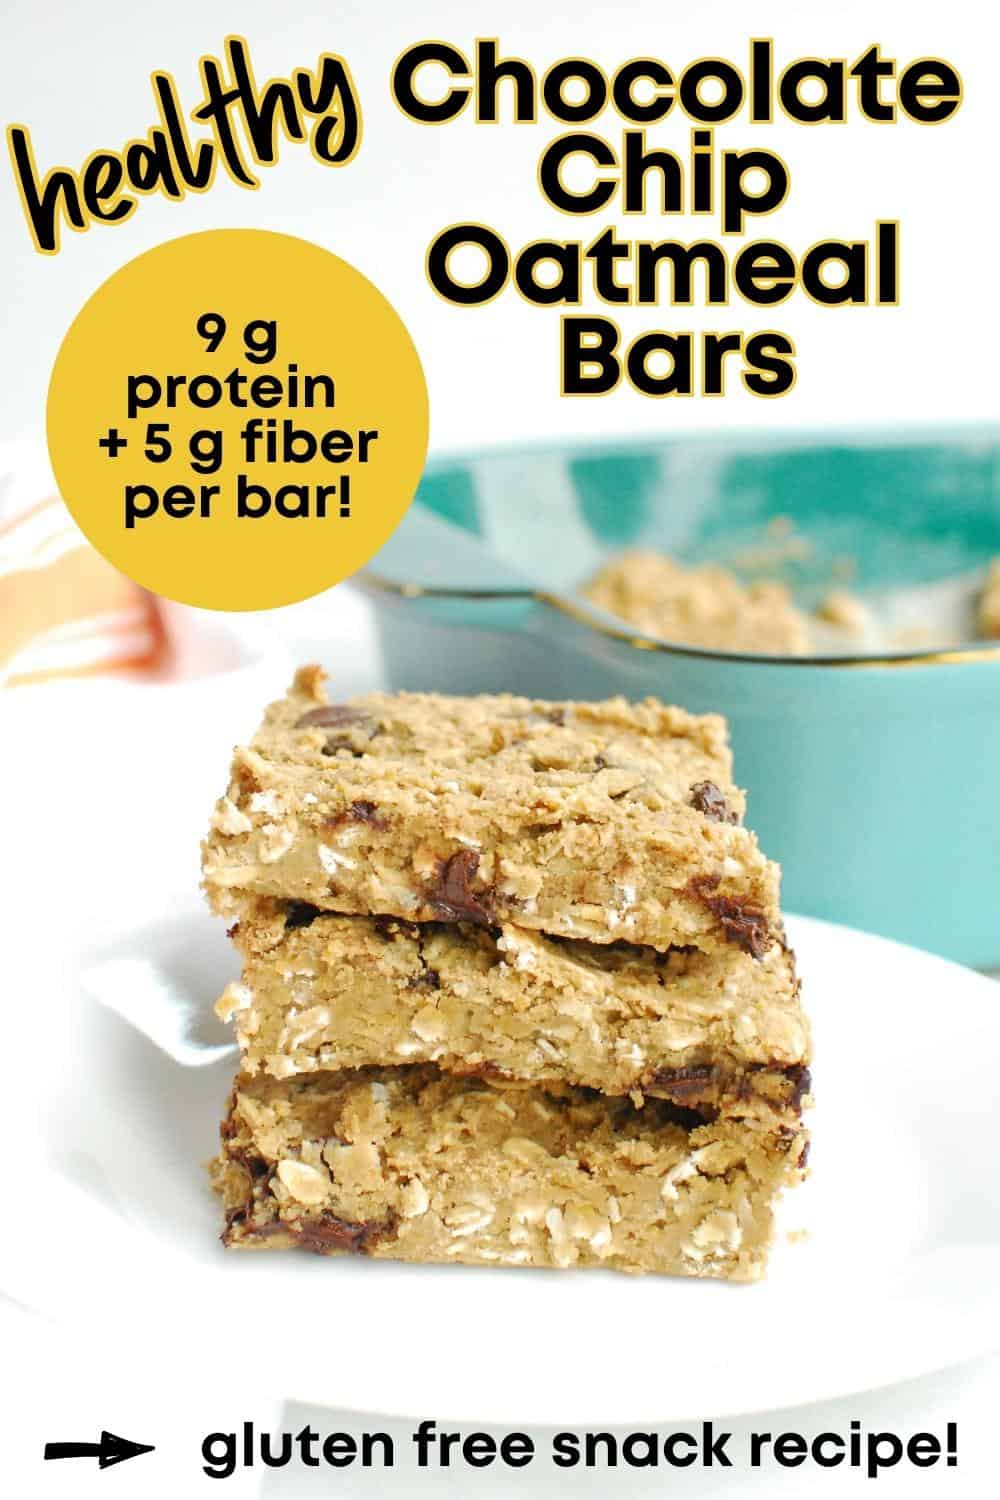 Three gluten free chocolate chip oatmeal bars stacked on a plate, with a text overlay with the name of the recipe.